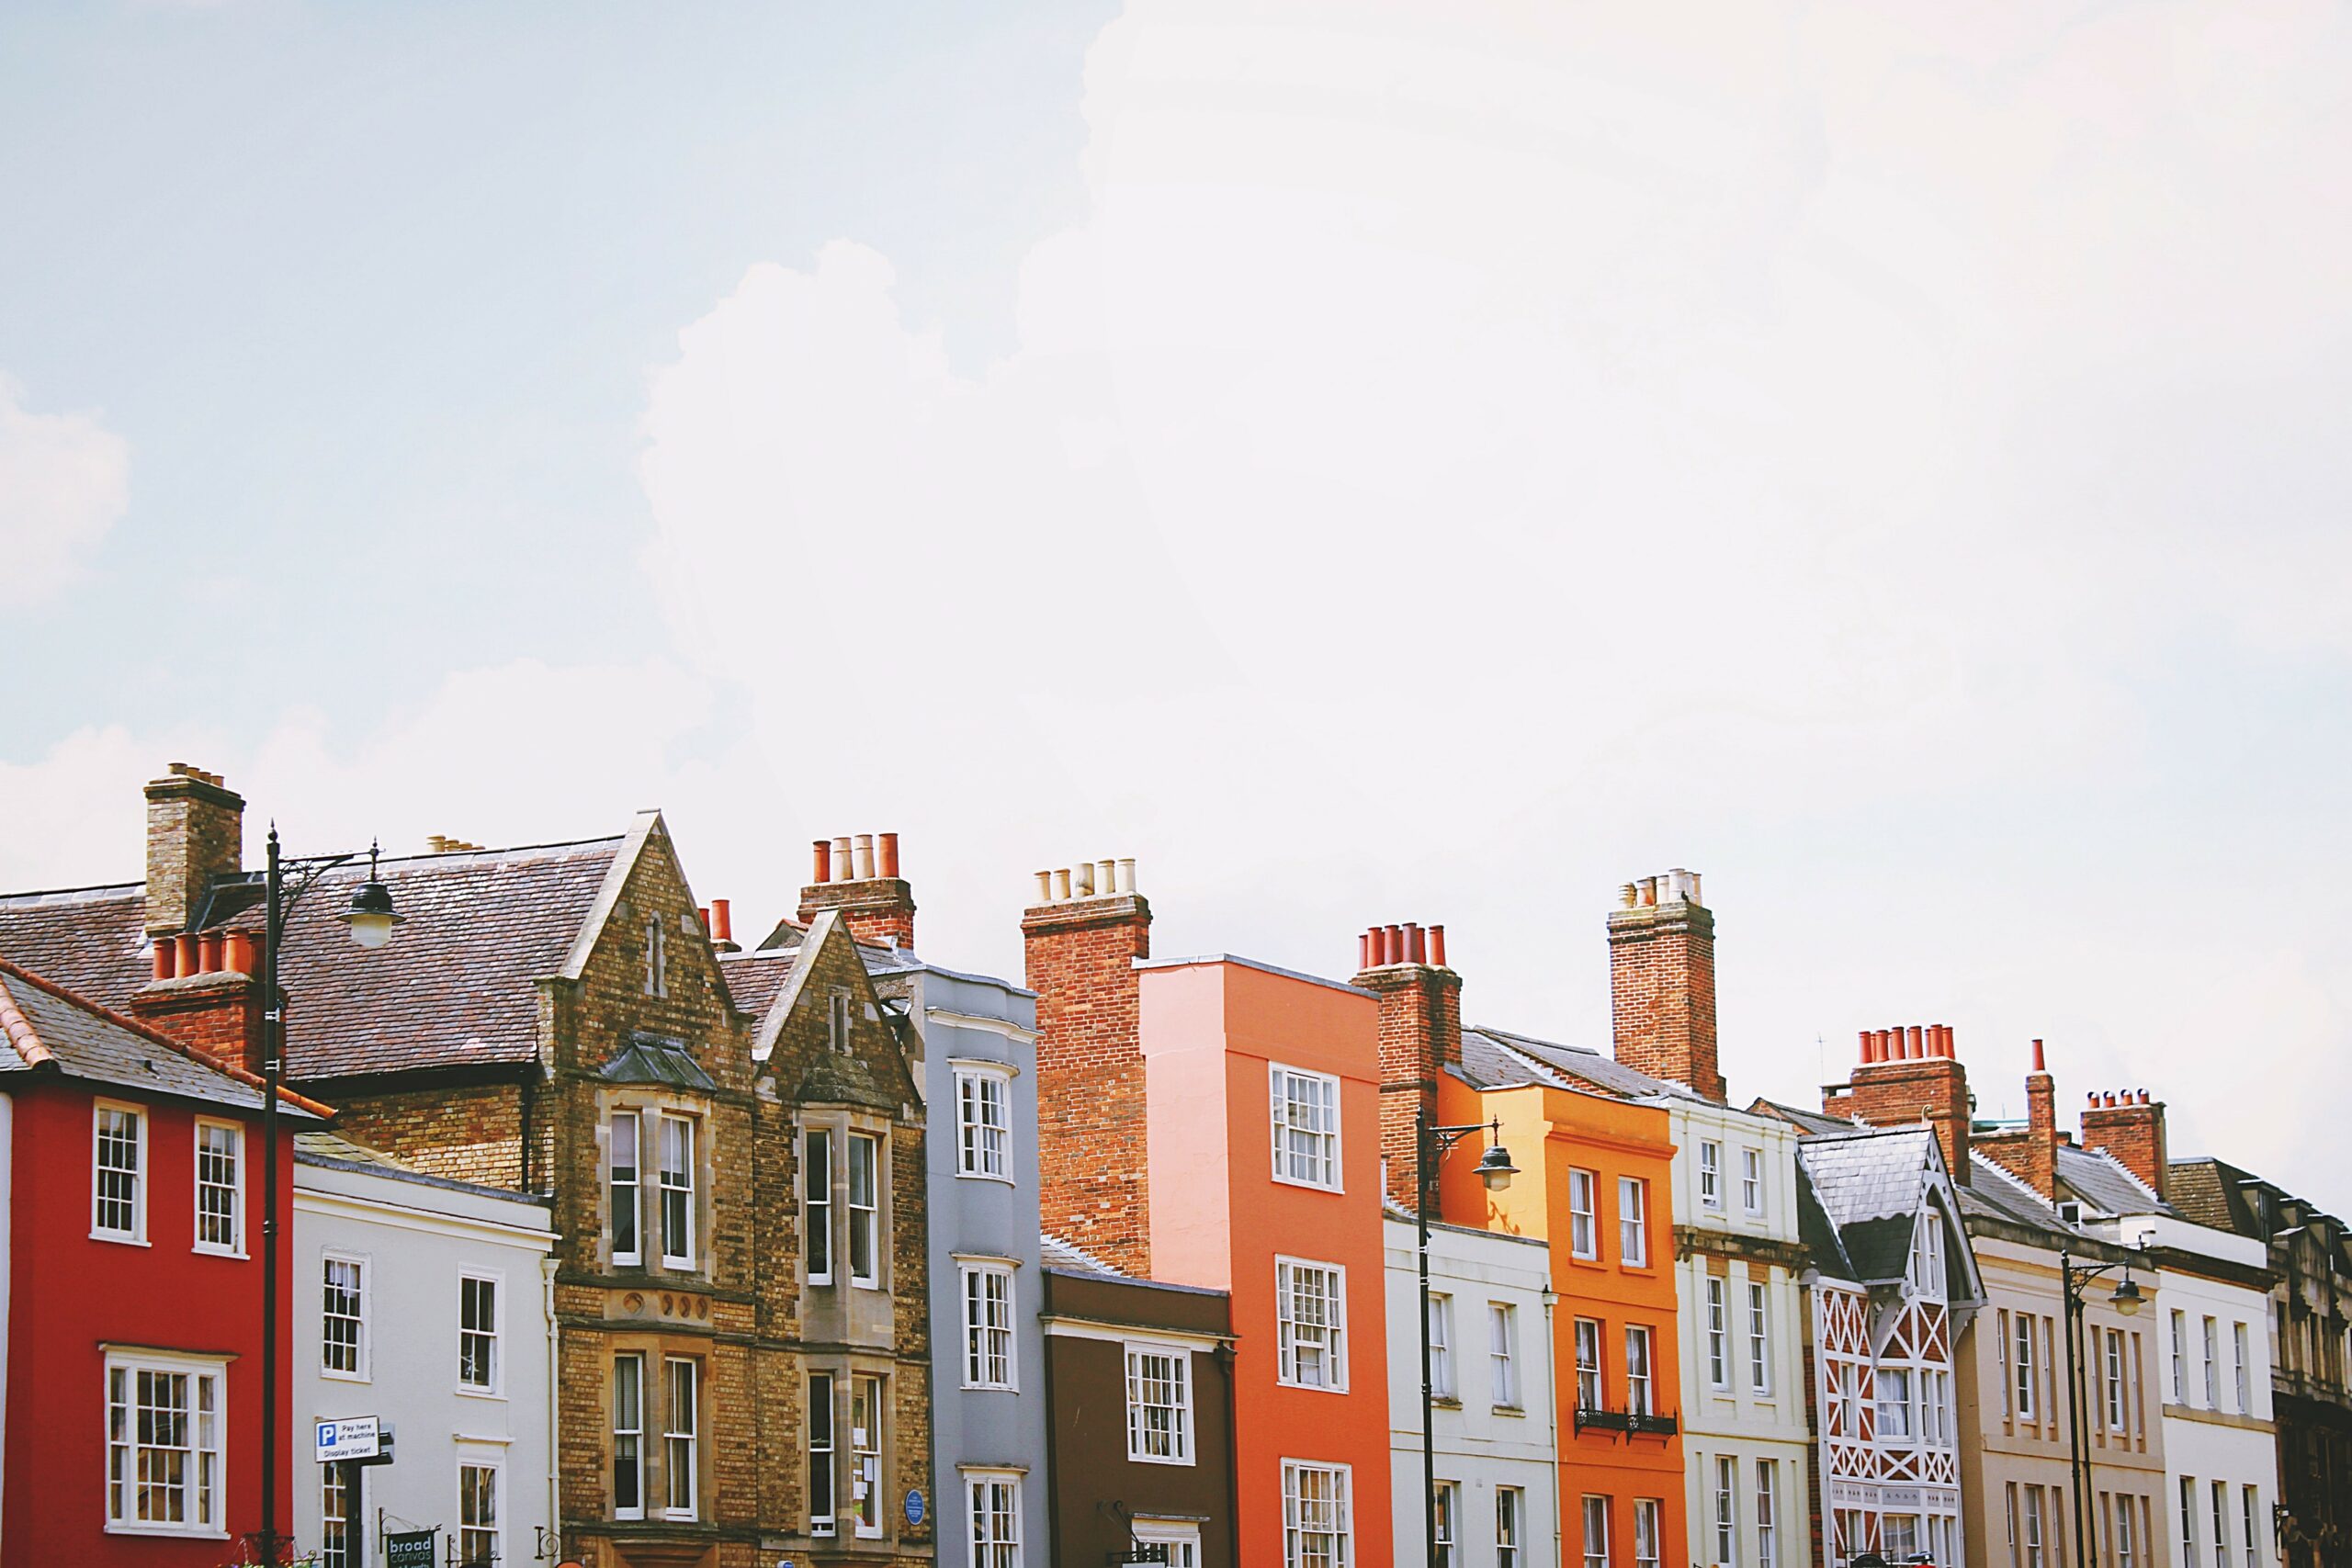 A stock image of a row of houses - start your search on Share to Buy today!